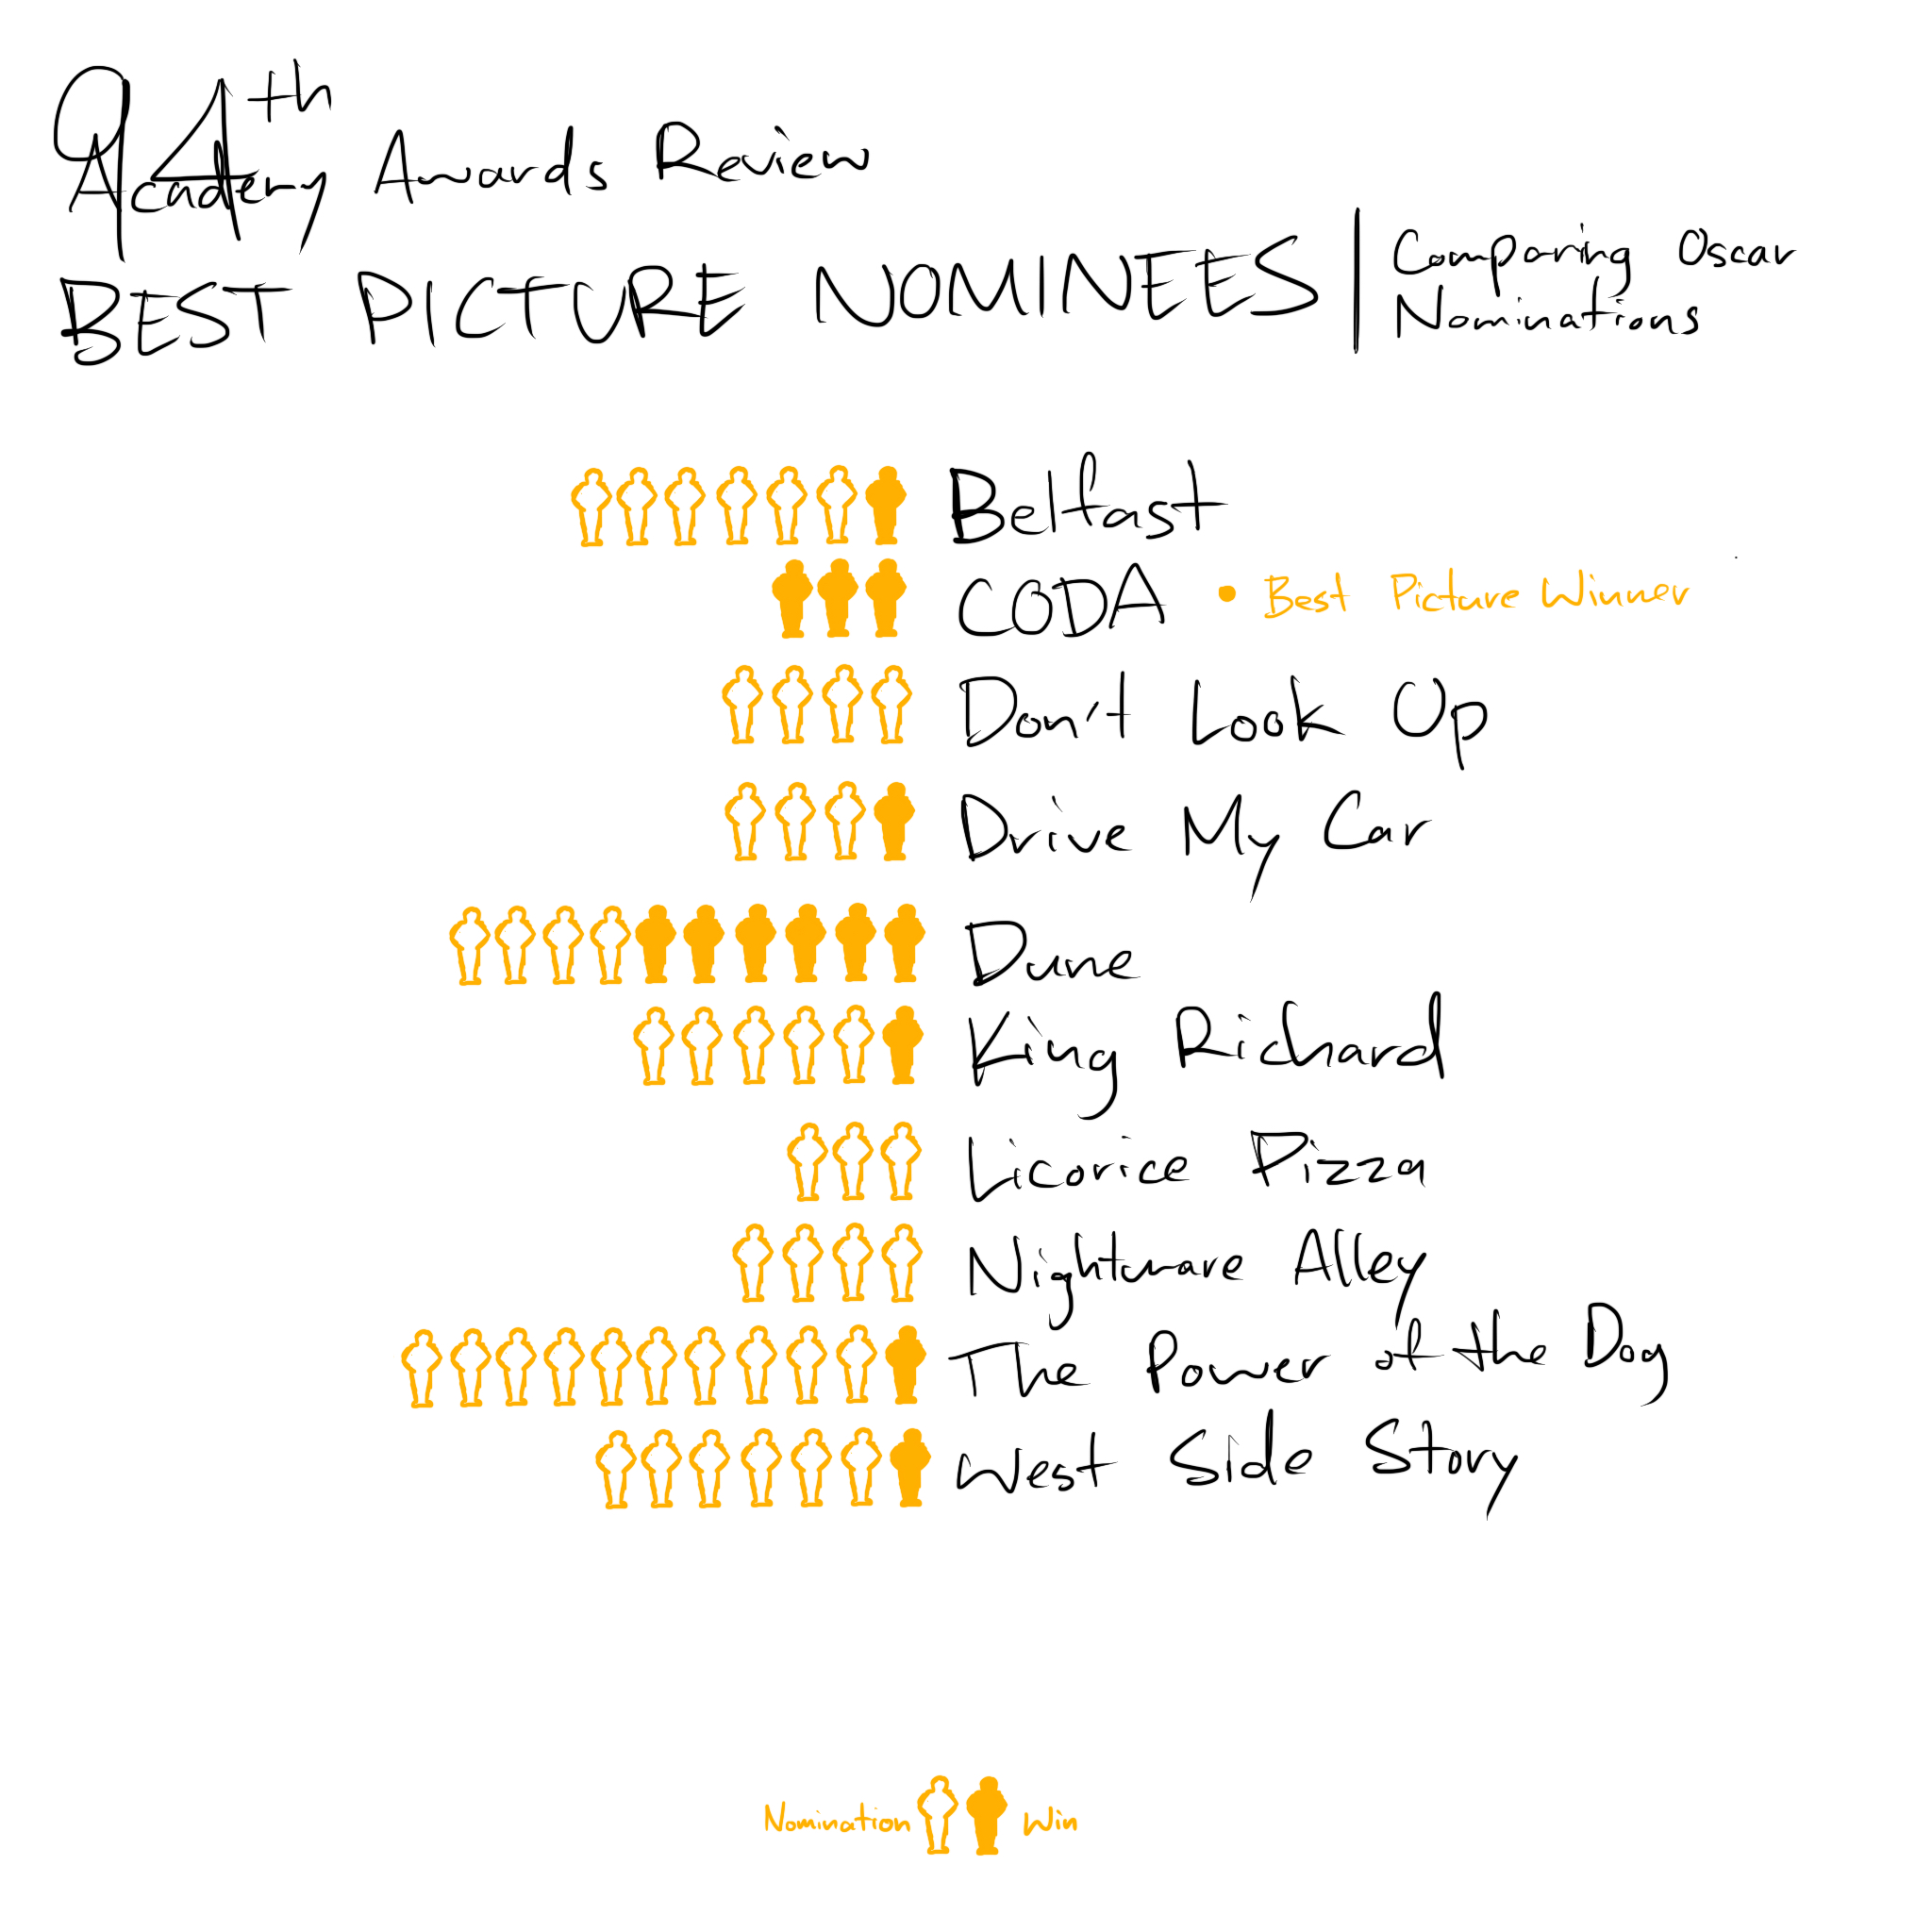 A rough sketch showing the total Oscar nominations and wins of best picture nominations.